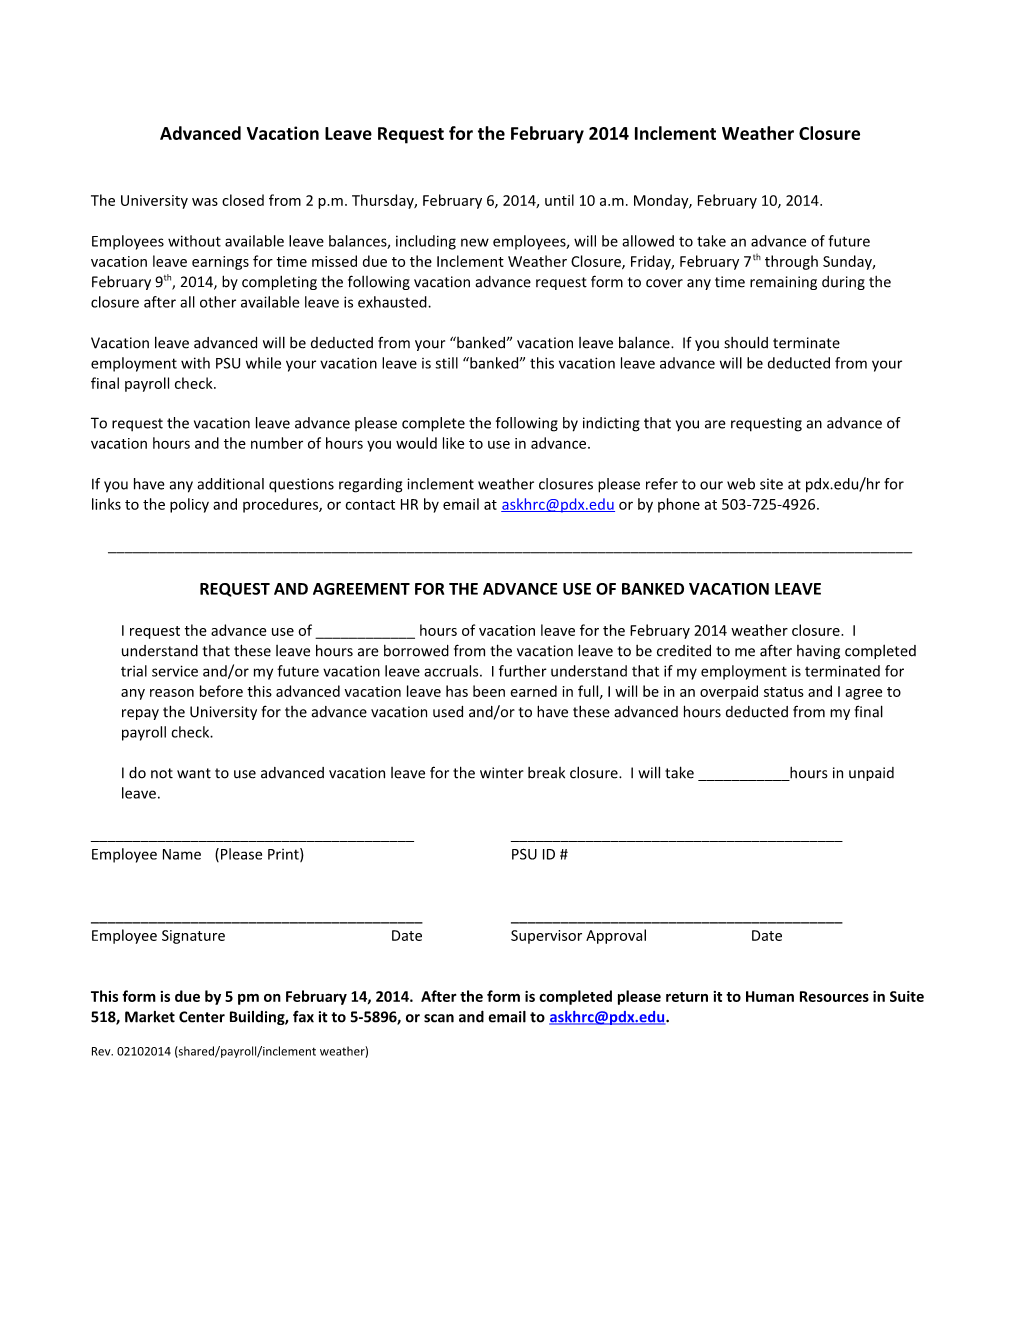 Advanced Vacation Leave Request for the February 2014 Inclement Weather Closure